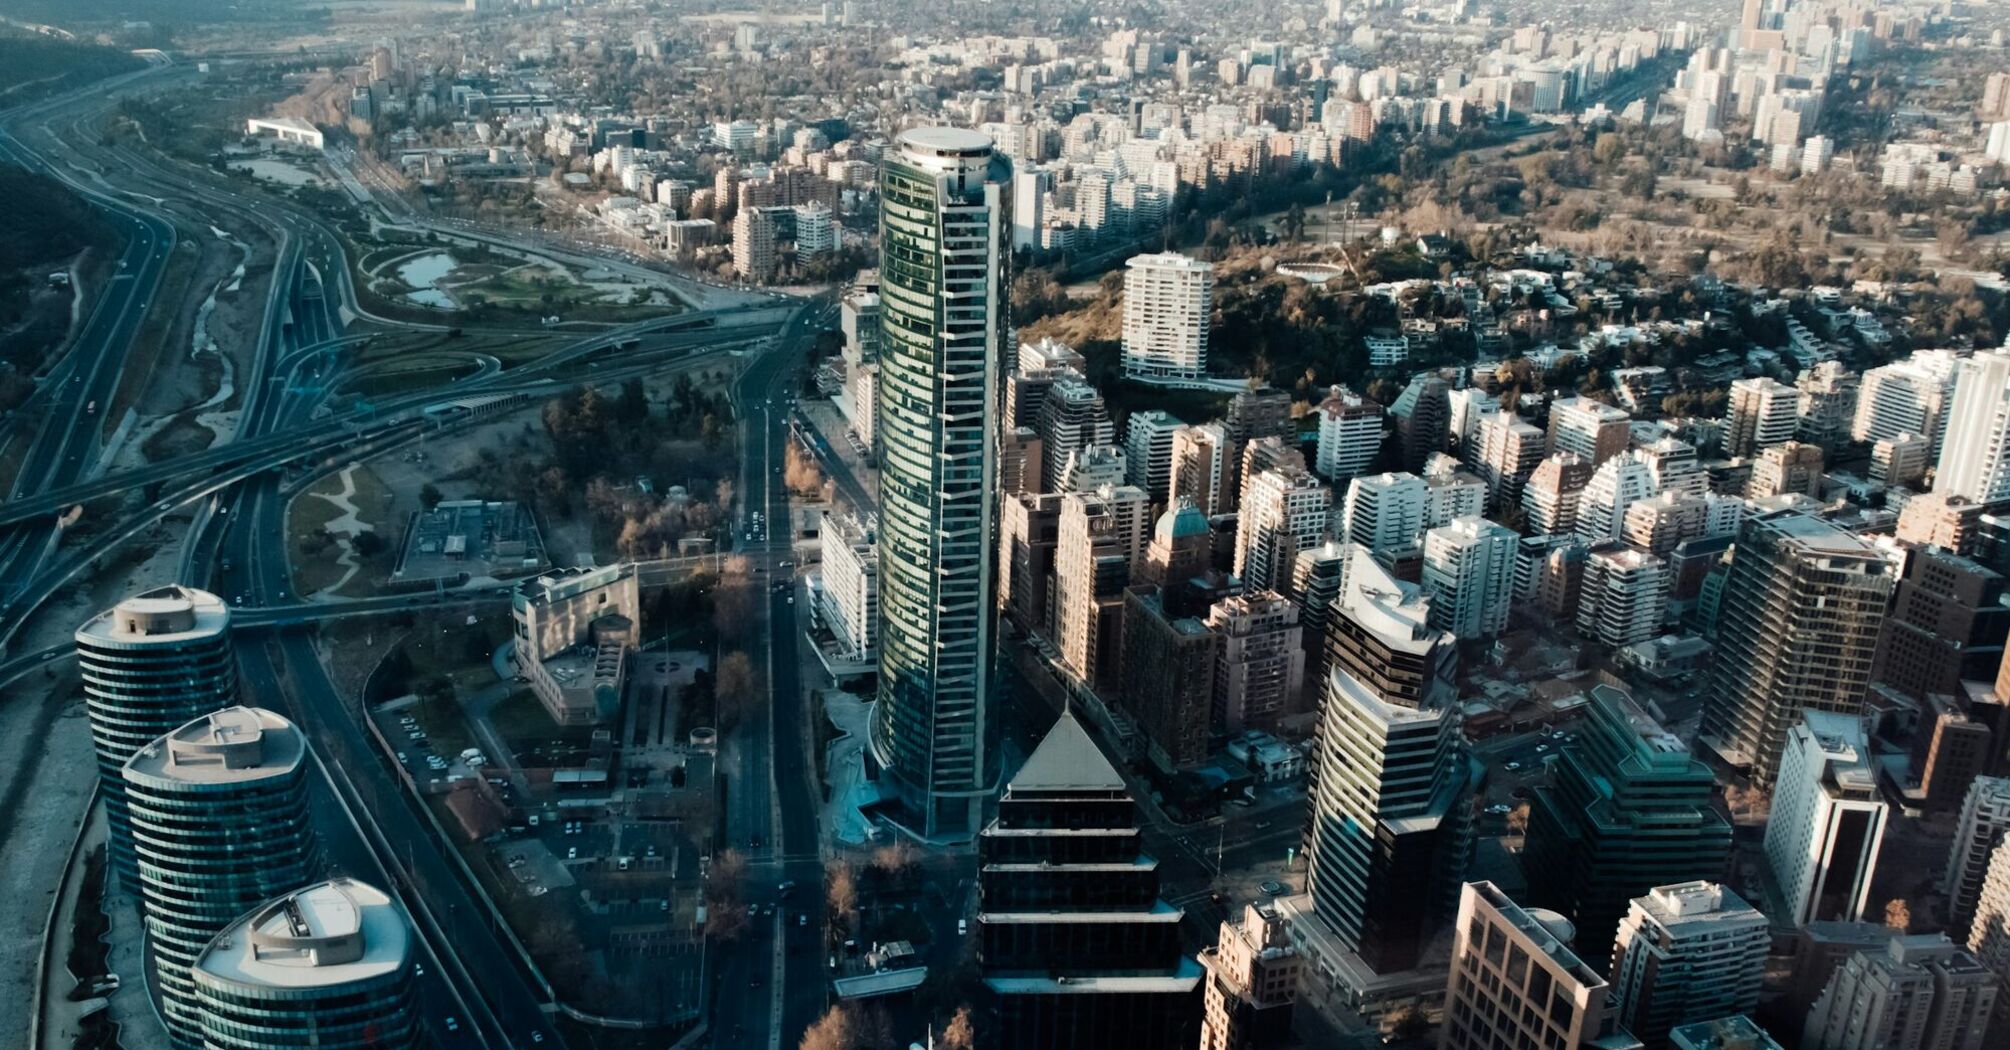 Aerial view of Santiago, Chile, showcasing the city's dense architecture with modern skyscrapers, residential buildings, and busy roadways 